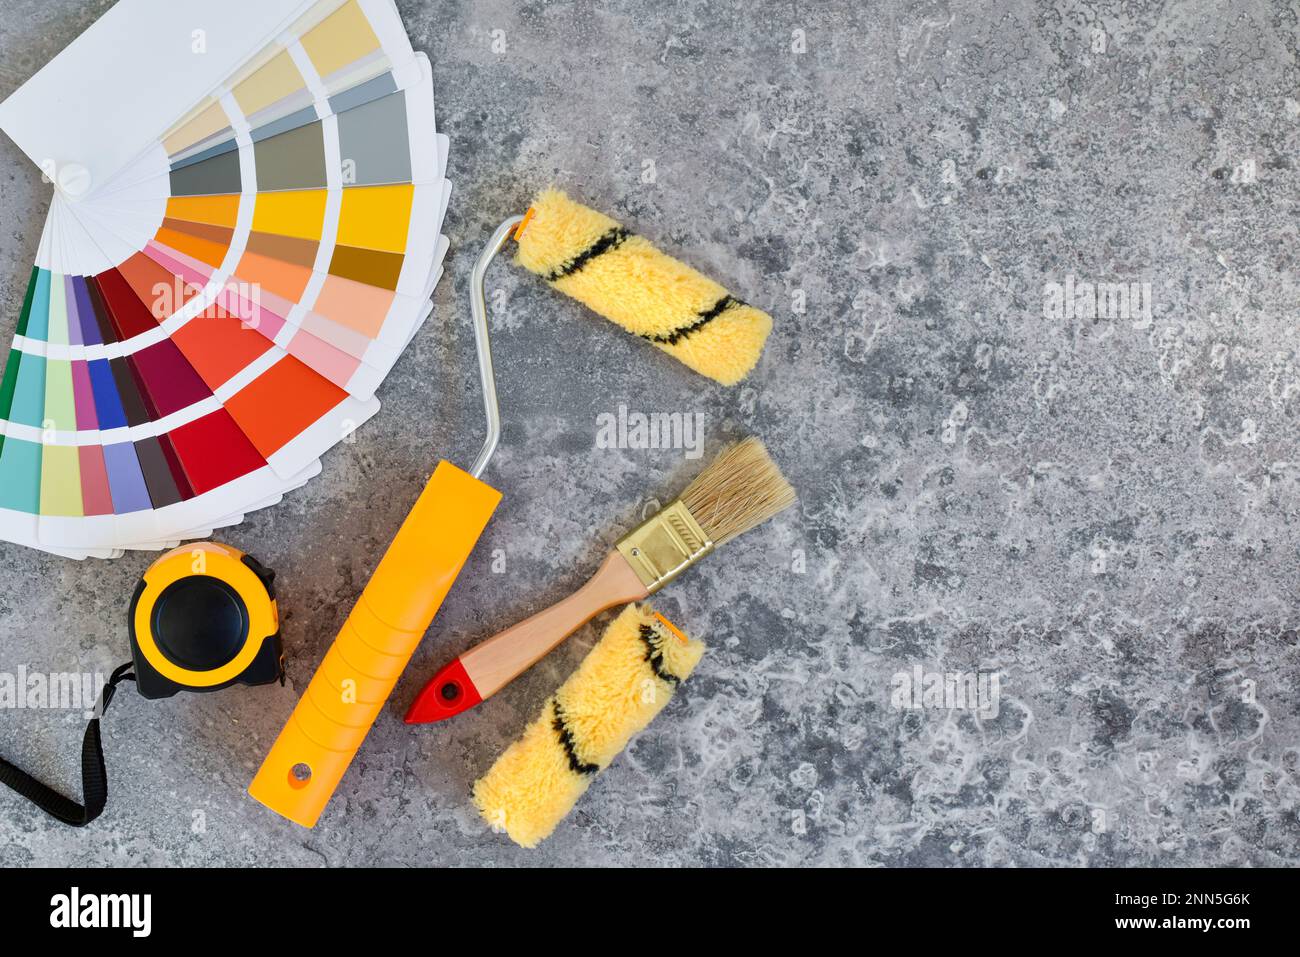 Home paint roller and a paint brushe, color swatches on gray stone background. Top view. Repair housing concept. Stock Photo